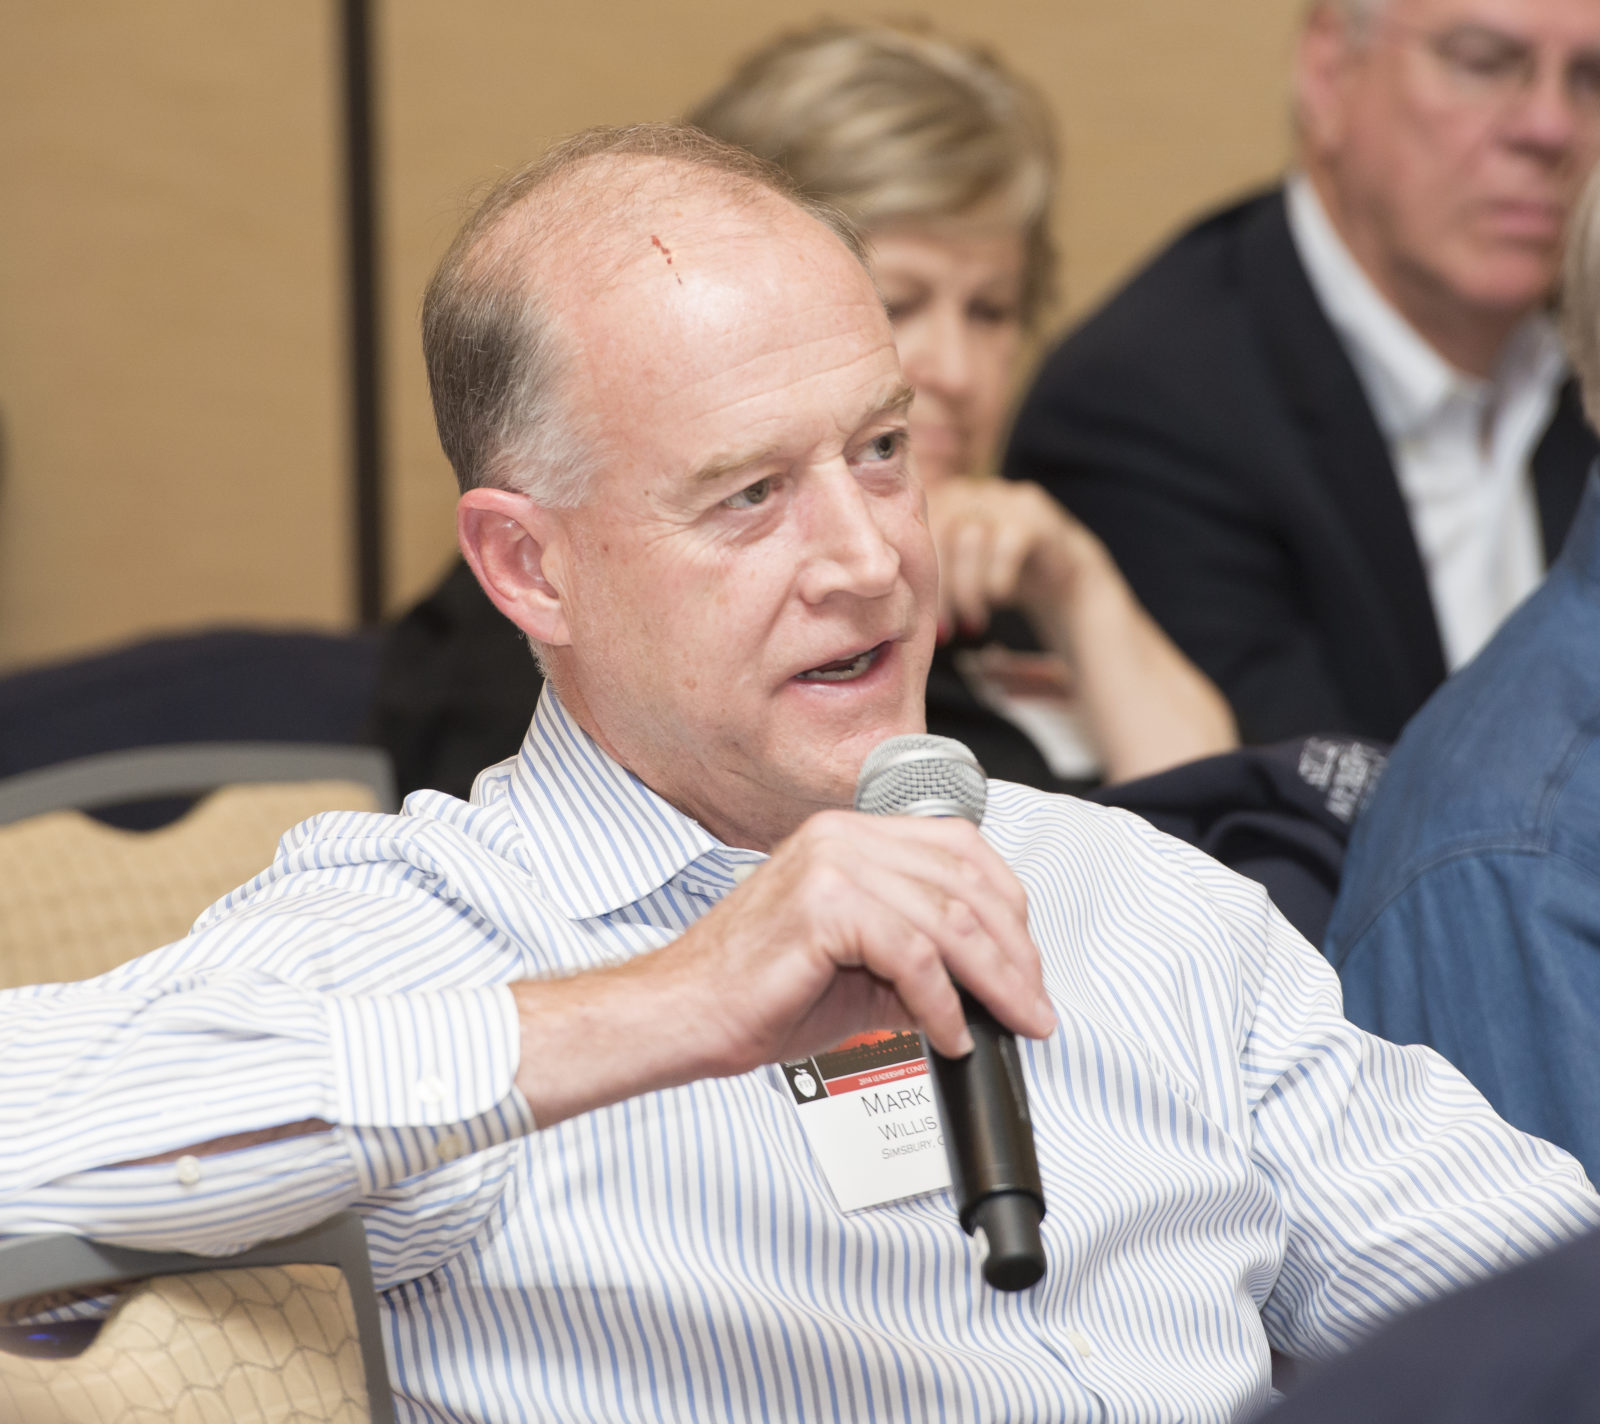 Mark asks a question during a TFAS alumni led panel on "Lessons and Insights of Election 2014" in Naples, Florida.